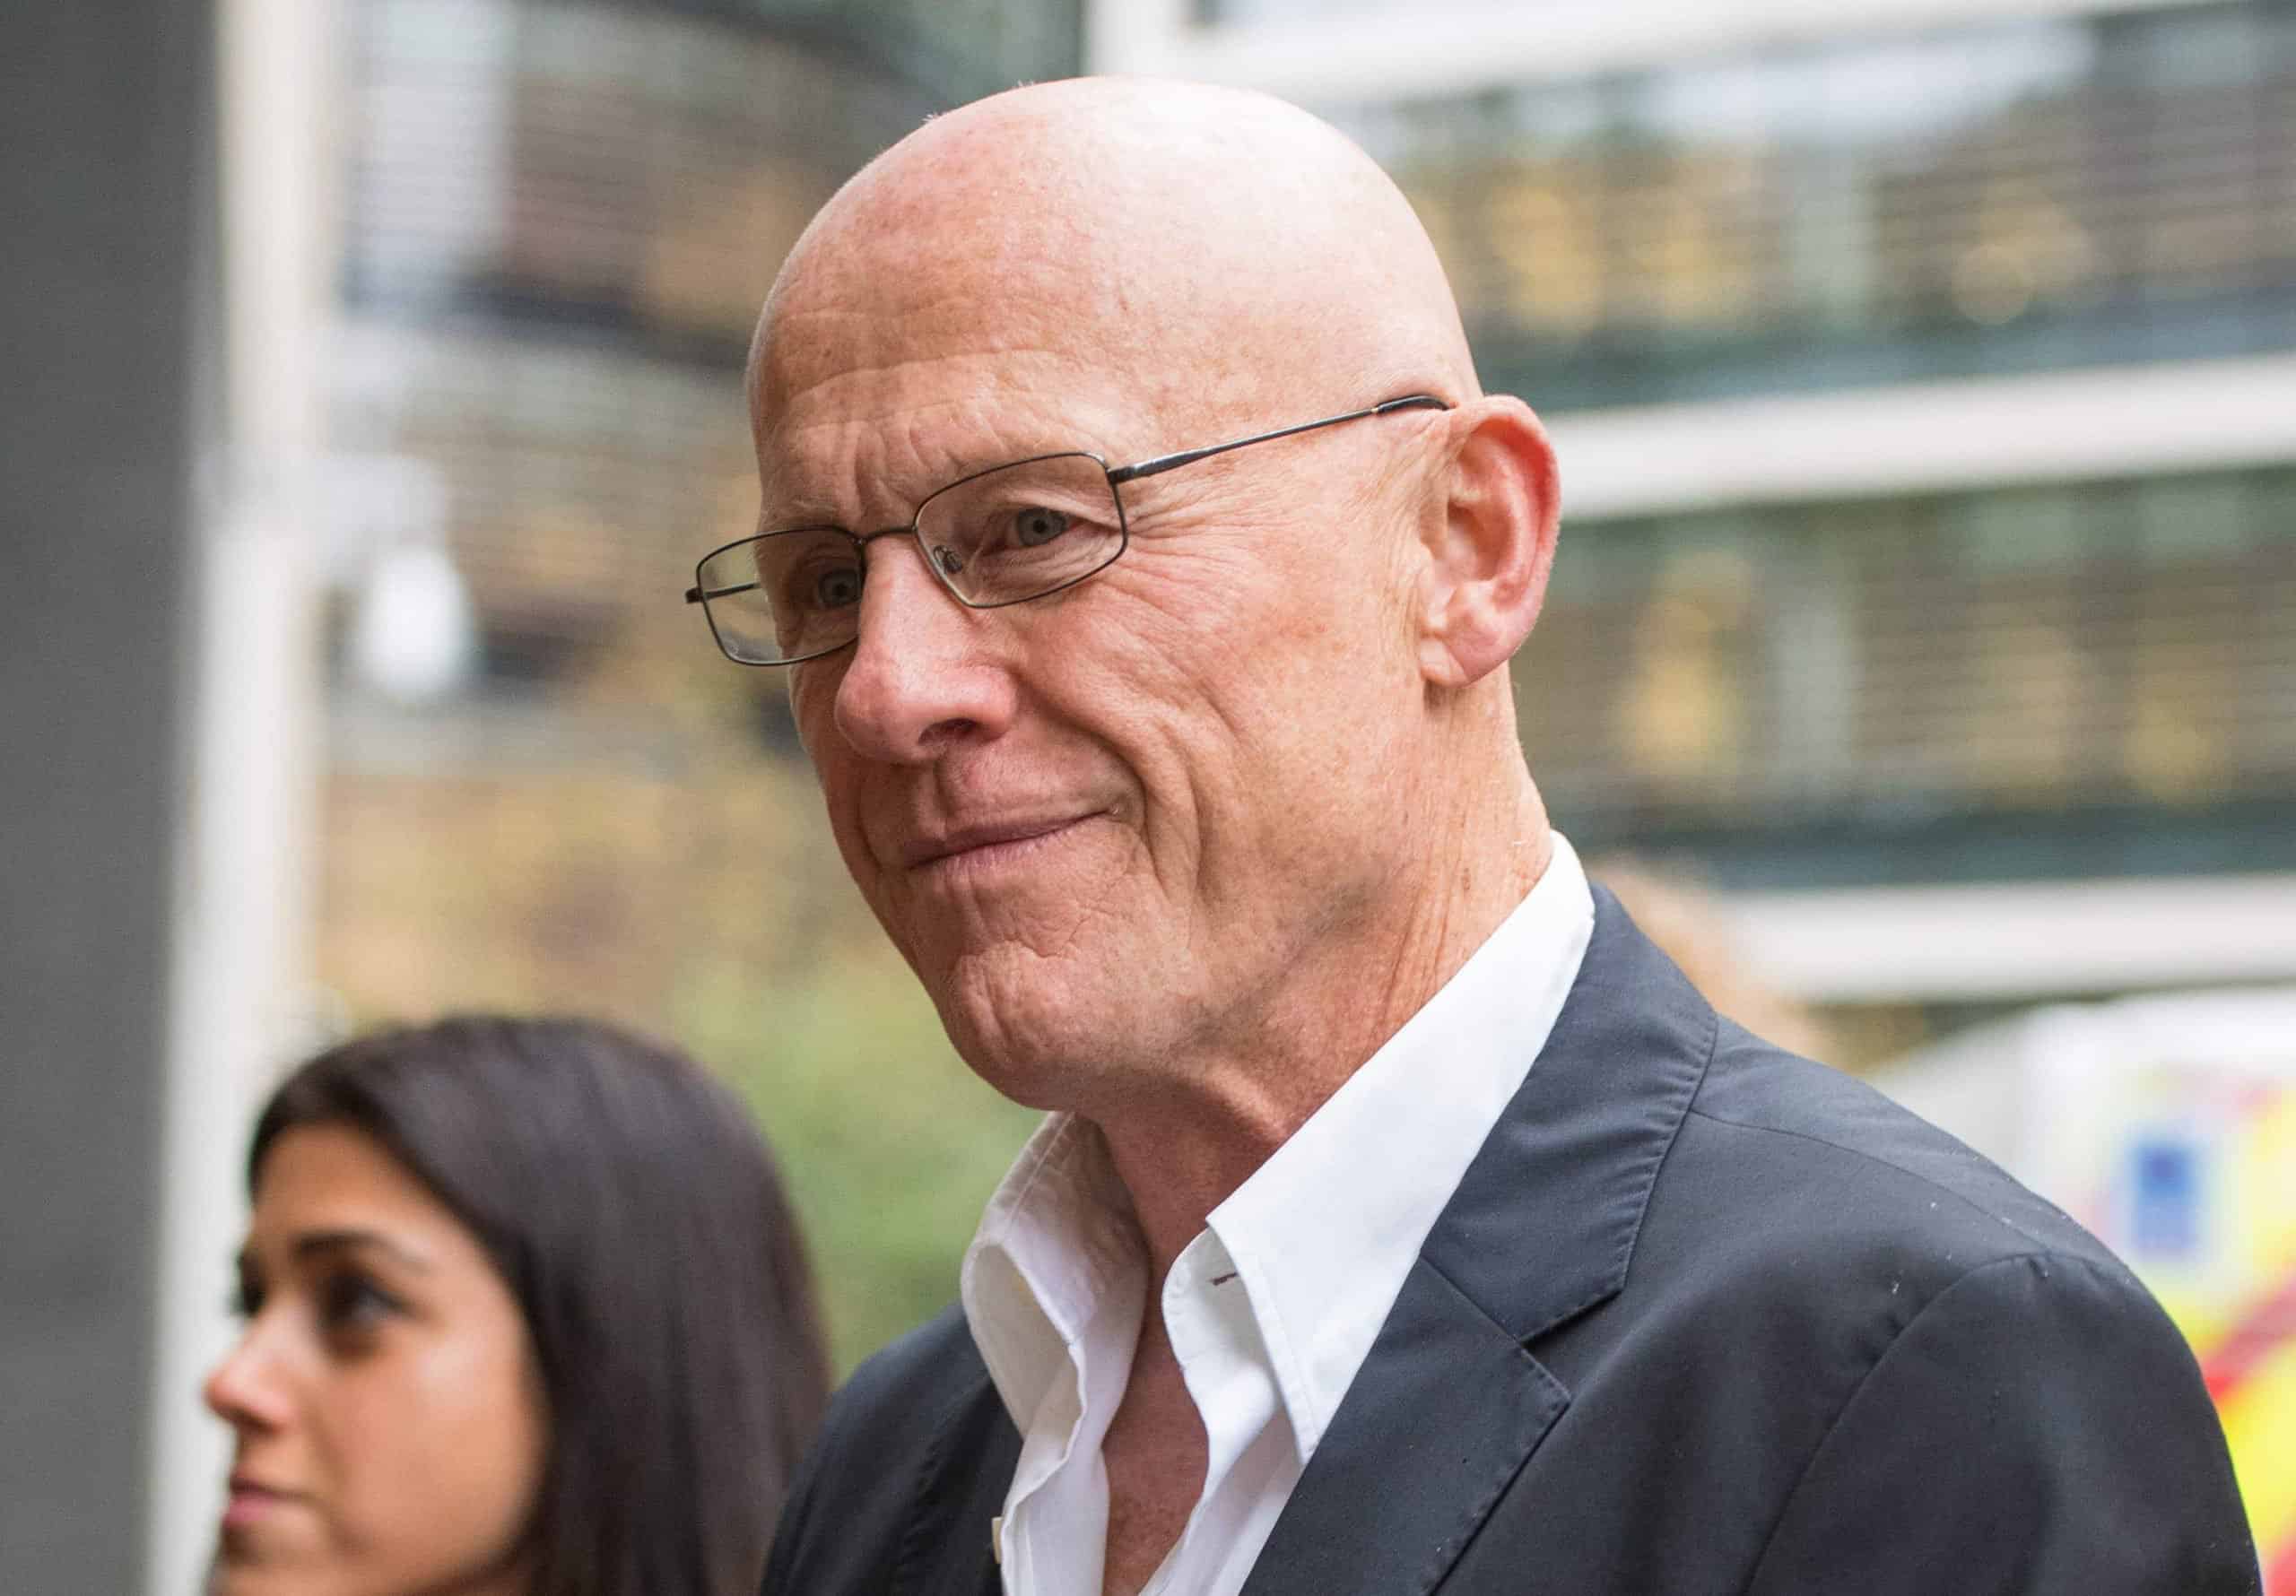 Billionaire who donated £500,000 to Tories in 2019 announces he is voting Labour